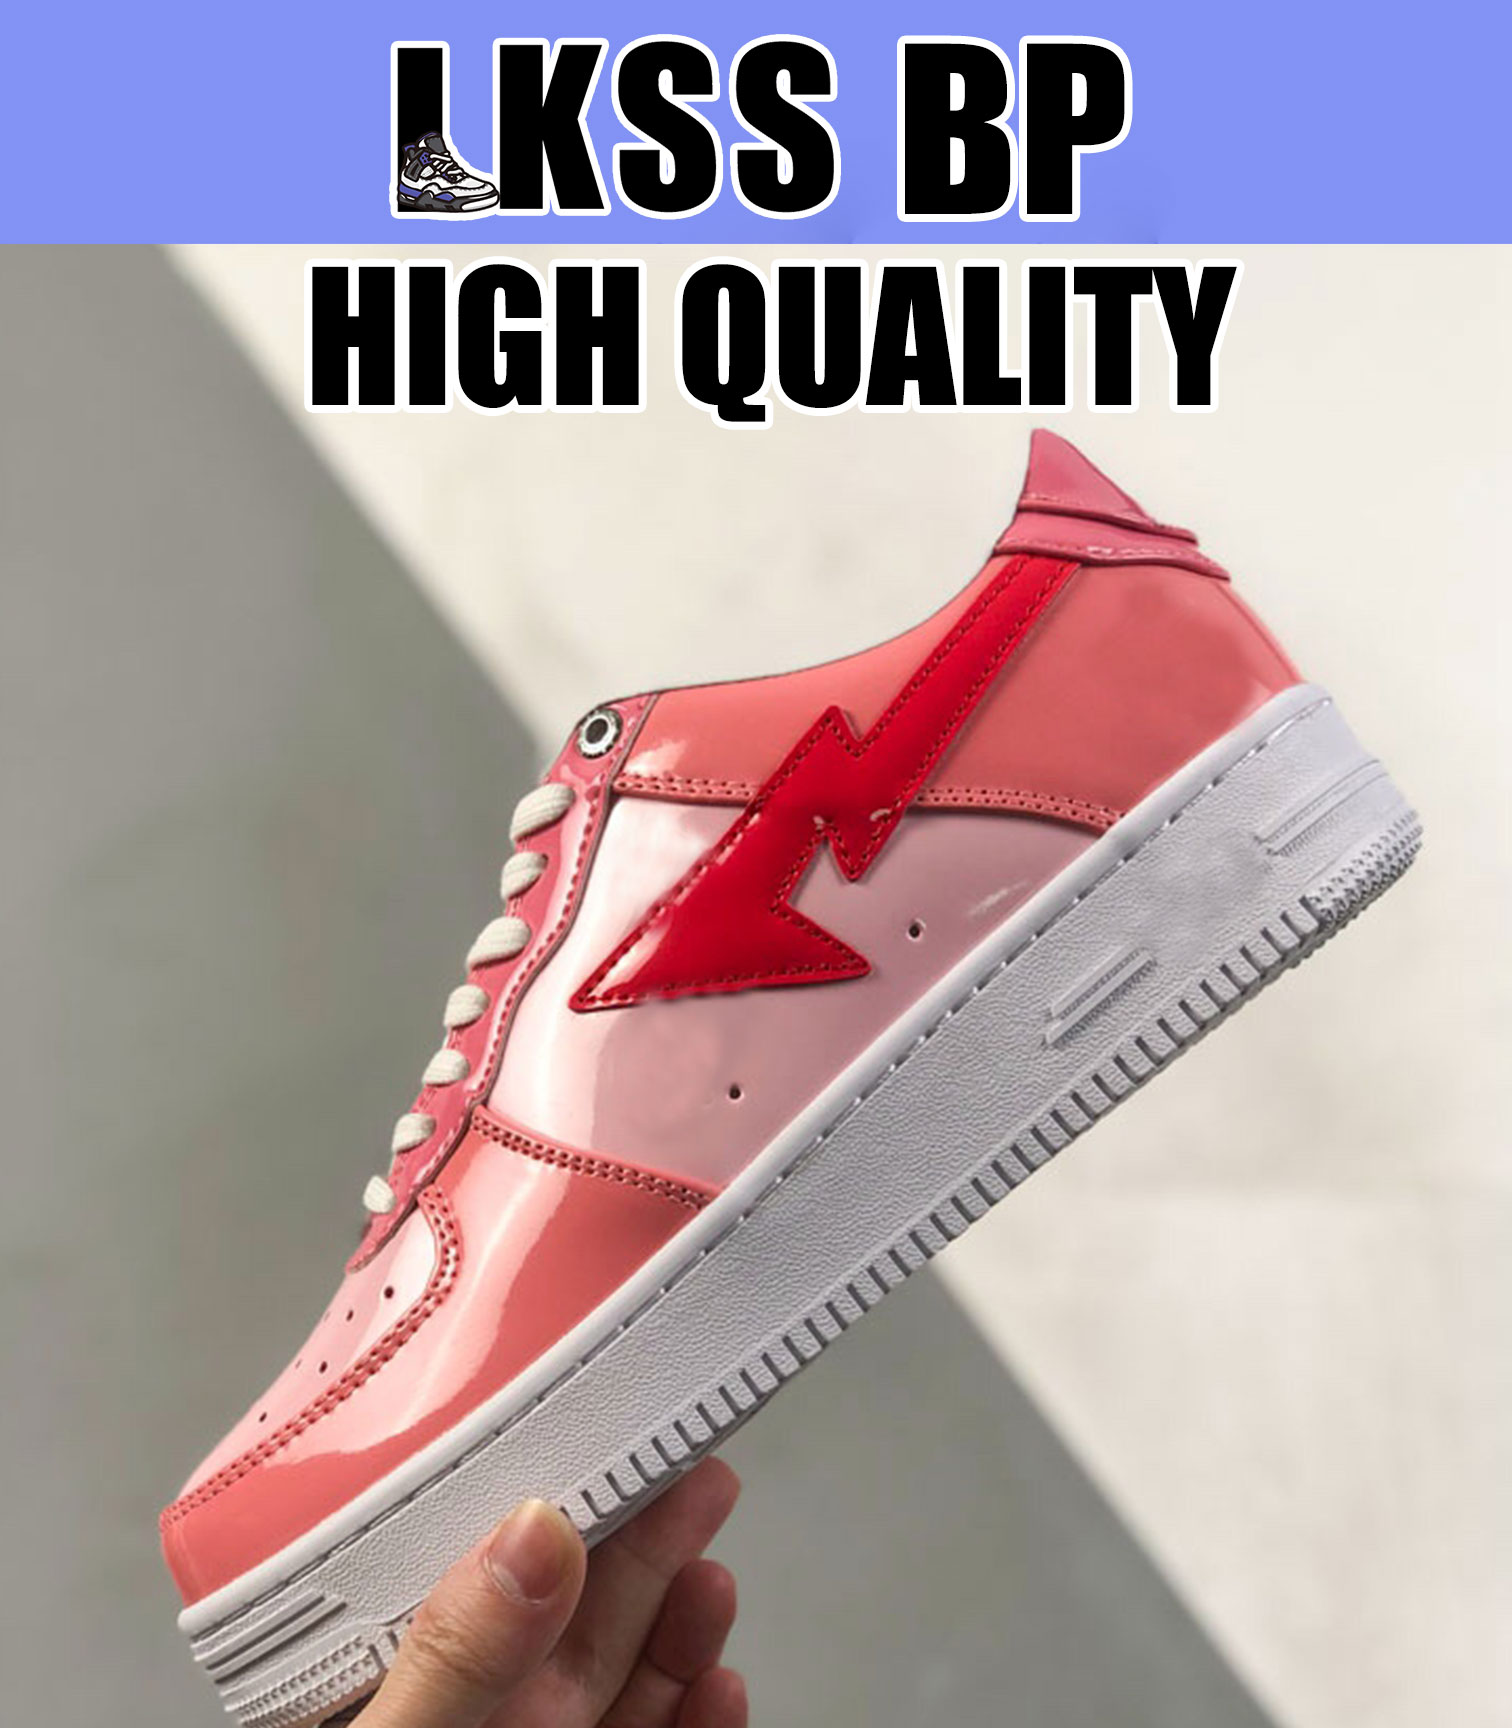 

LKSS BP Casual Shoes Bathing Apes Low Comics yellow red blue black green patent leather royal Bordeaux grey Brown Mint Teal Orange Pink men women Designer sneakers 011, As pic